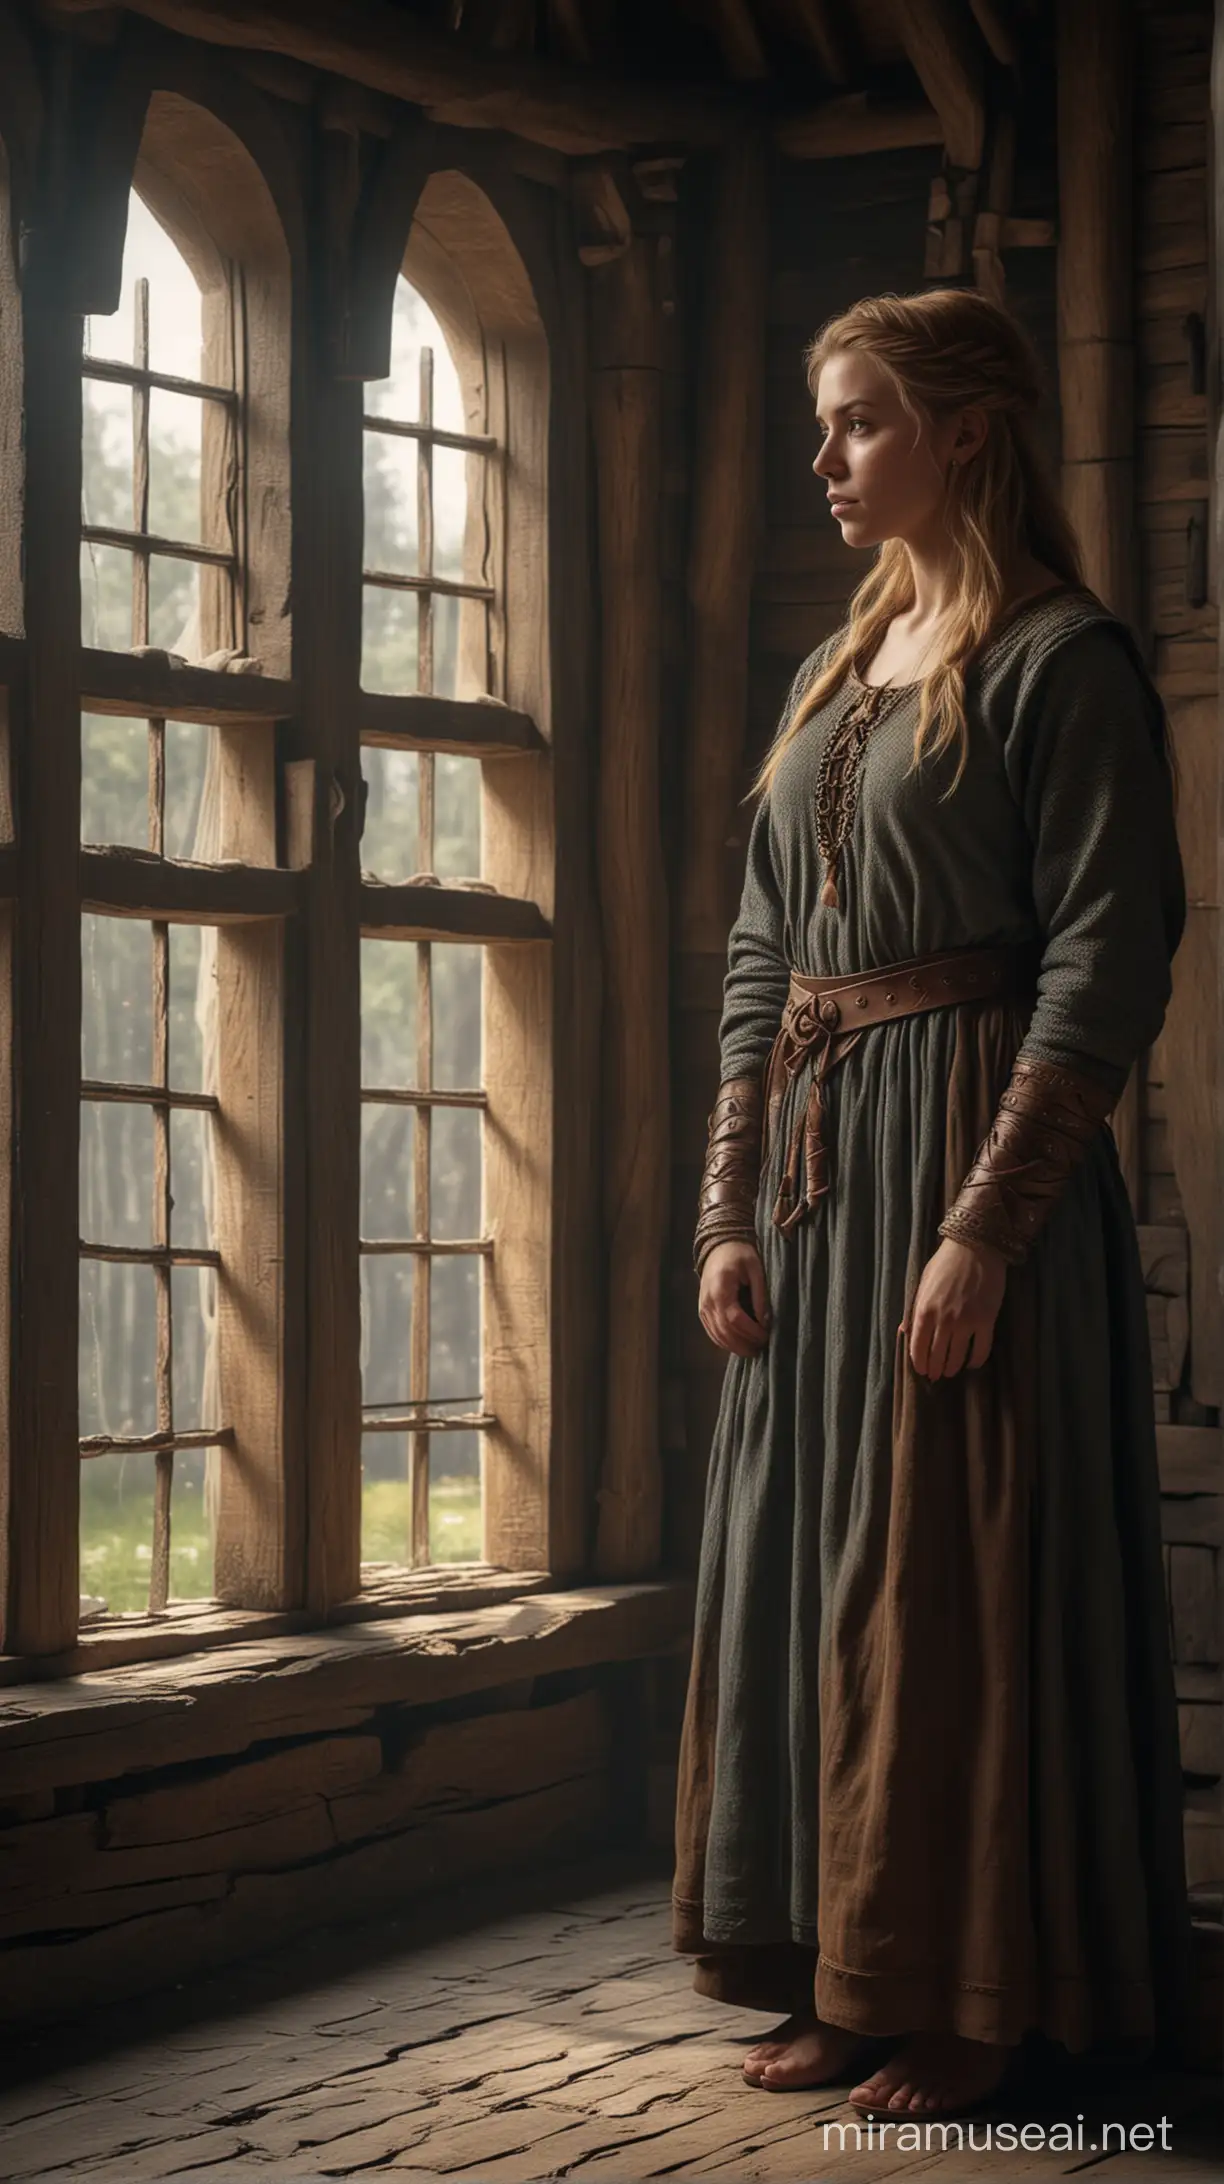 Viking Woman in Mead Hall Gazing Out Window in 890AD